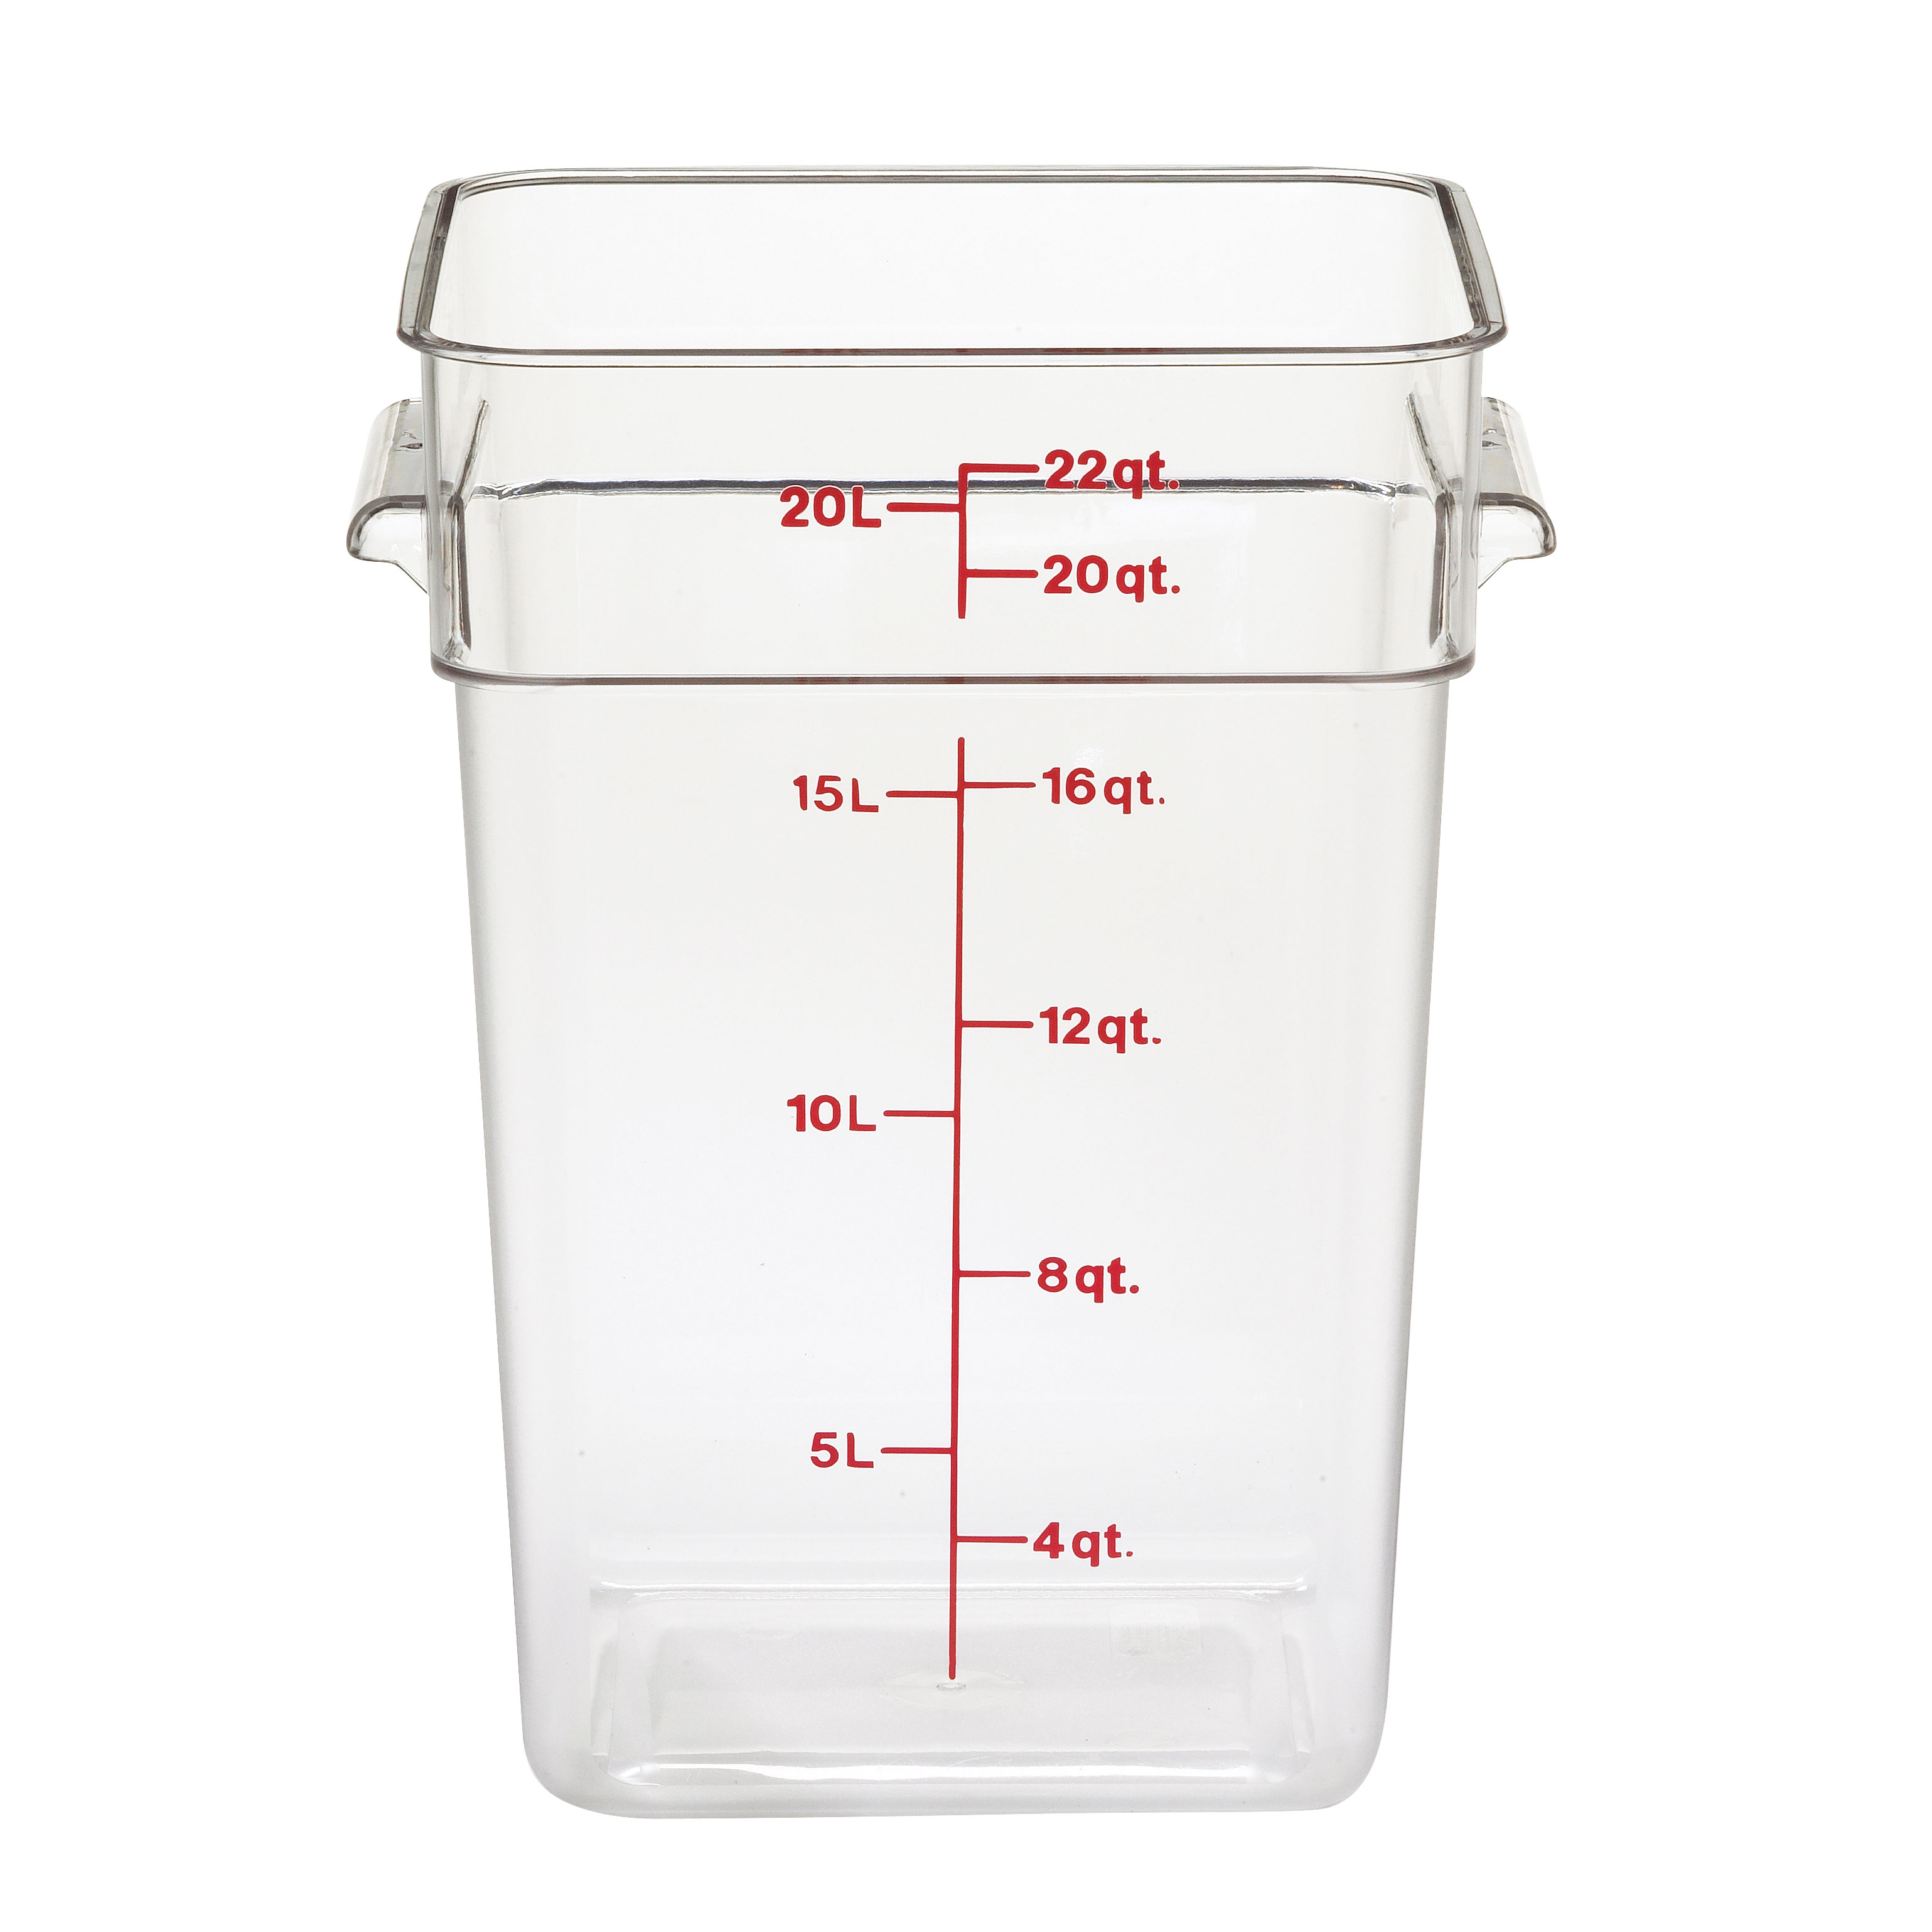 22qt. CLEAR SQUARE FOOD STORAGE CONTAINER, EACH, 10/21